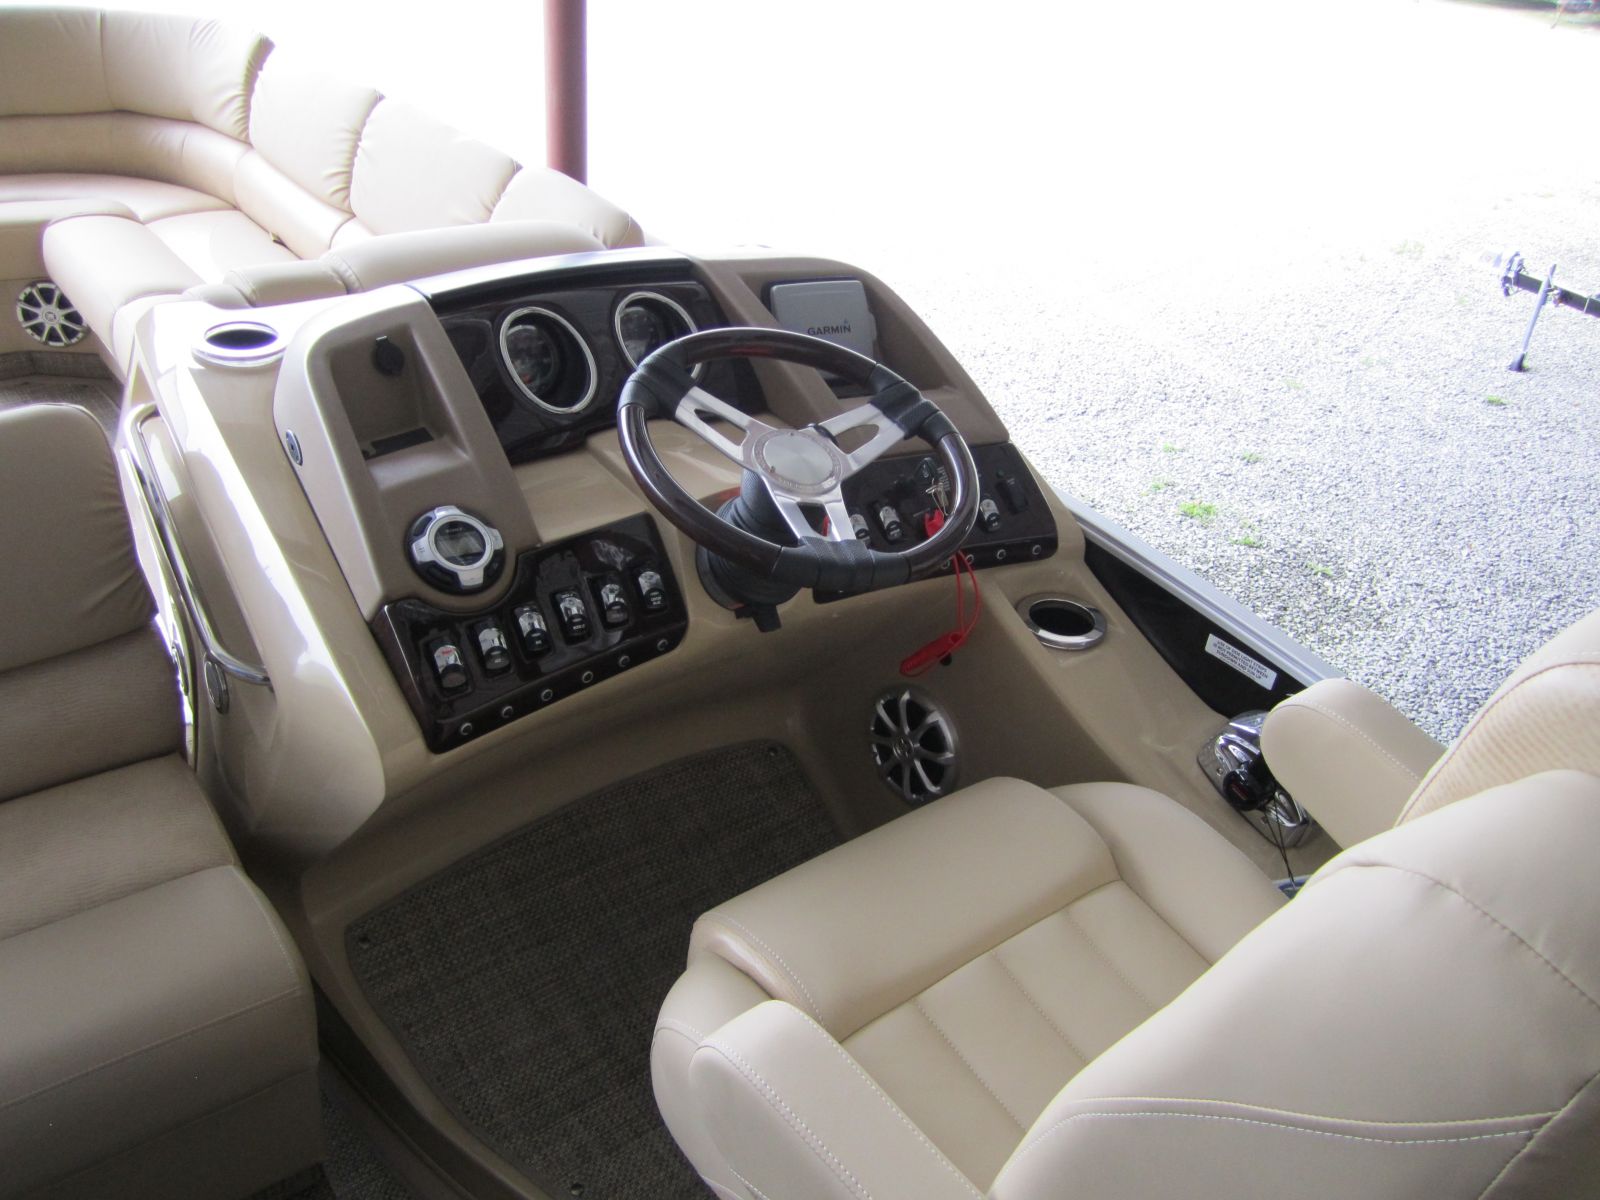 Pilot Seat And Console